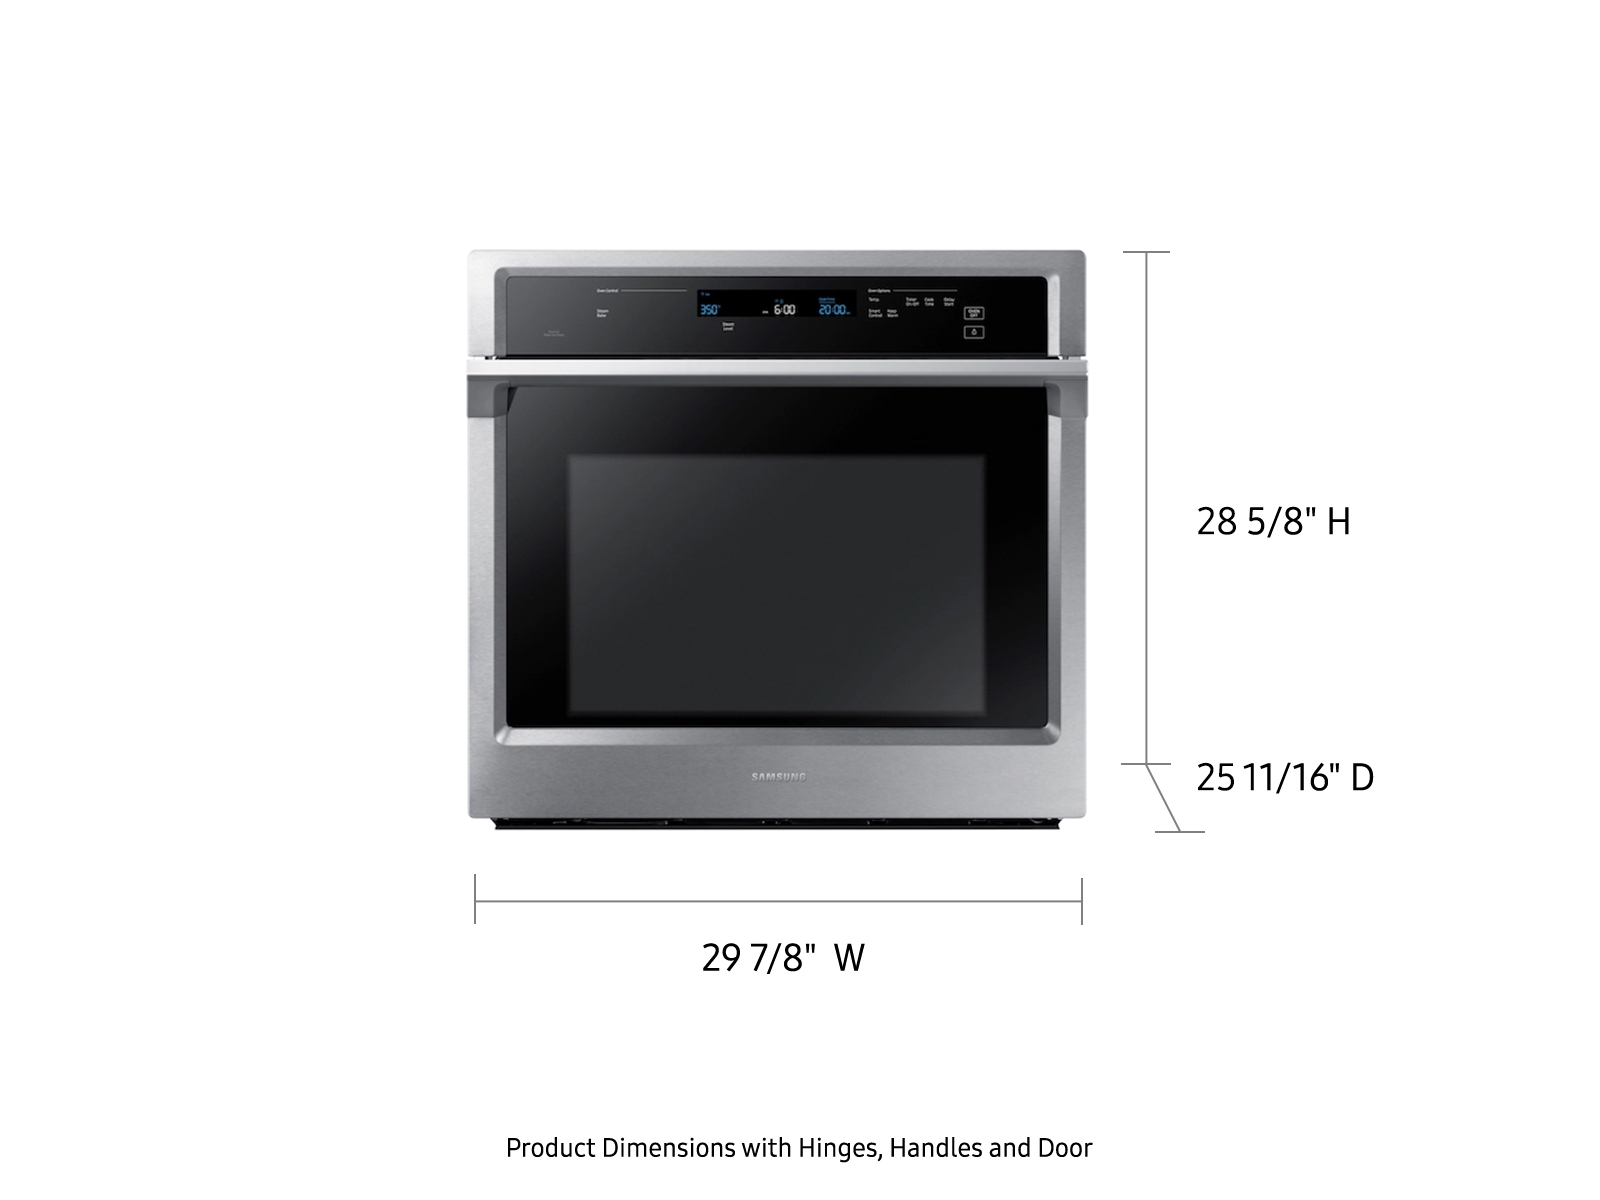 Samsung 30-Inch Smart Single Wall Oven with Steam Cook in Stainless Steel